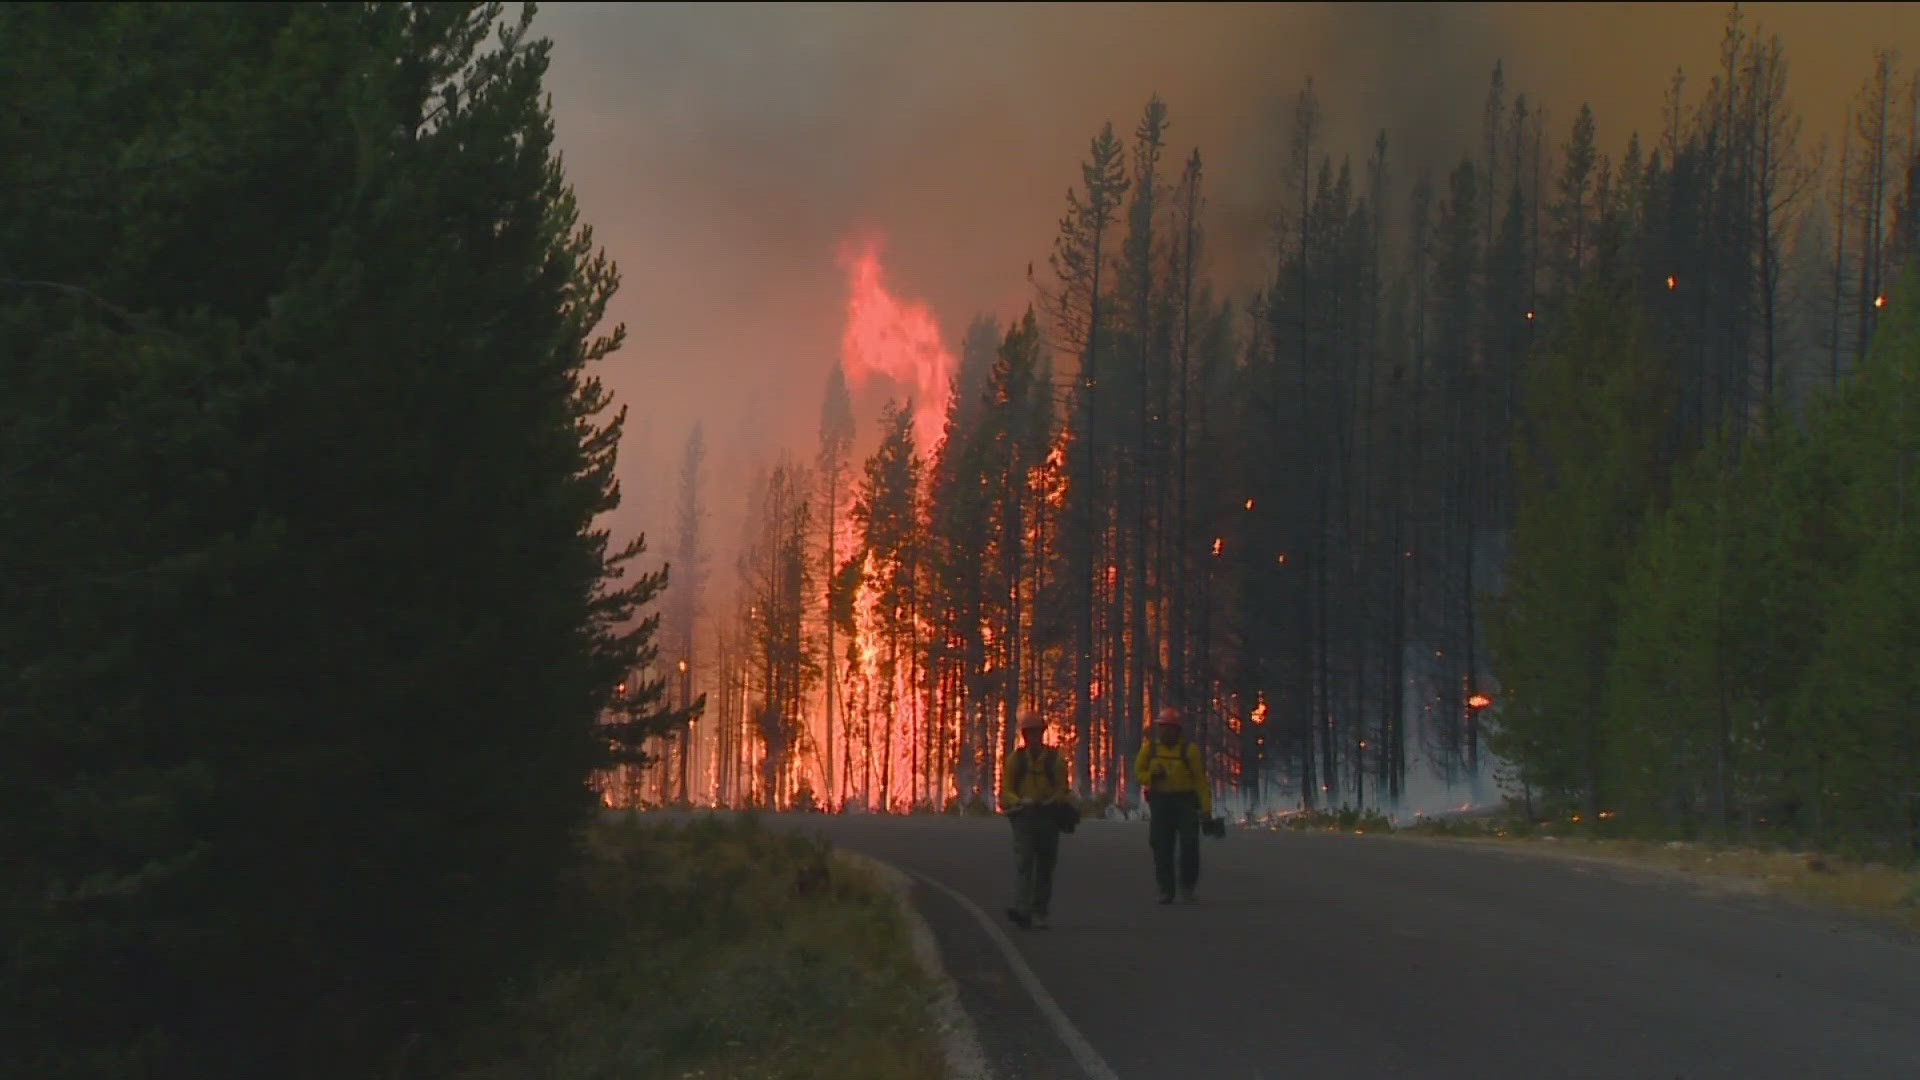 Gov. Brad Little and the Idaho Department of Lands is calling on Gem State residents to learn more about protection and prevention with wildfire season approaching.